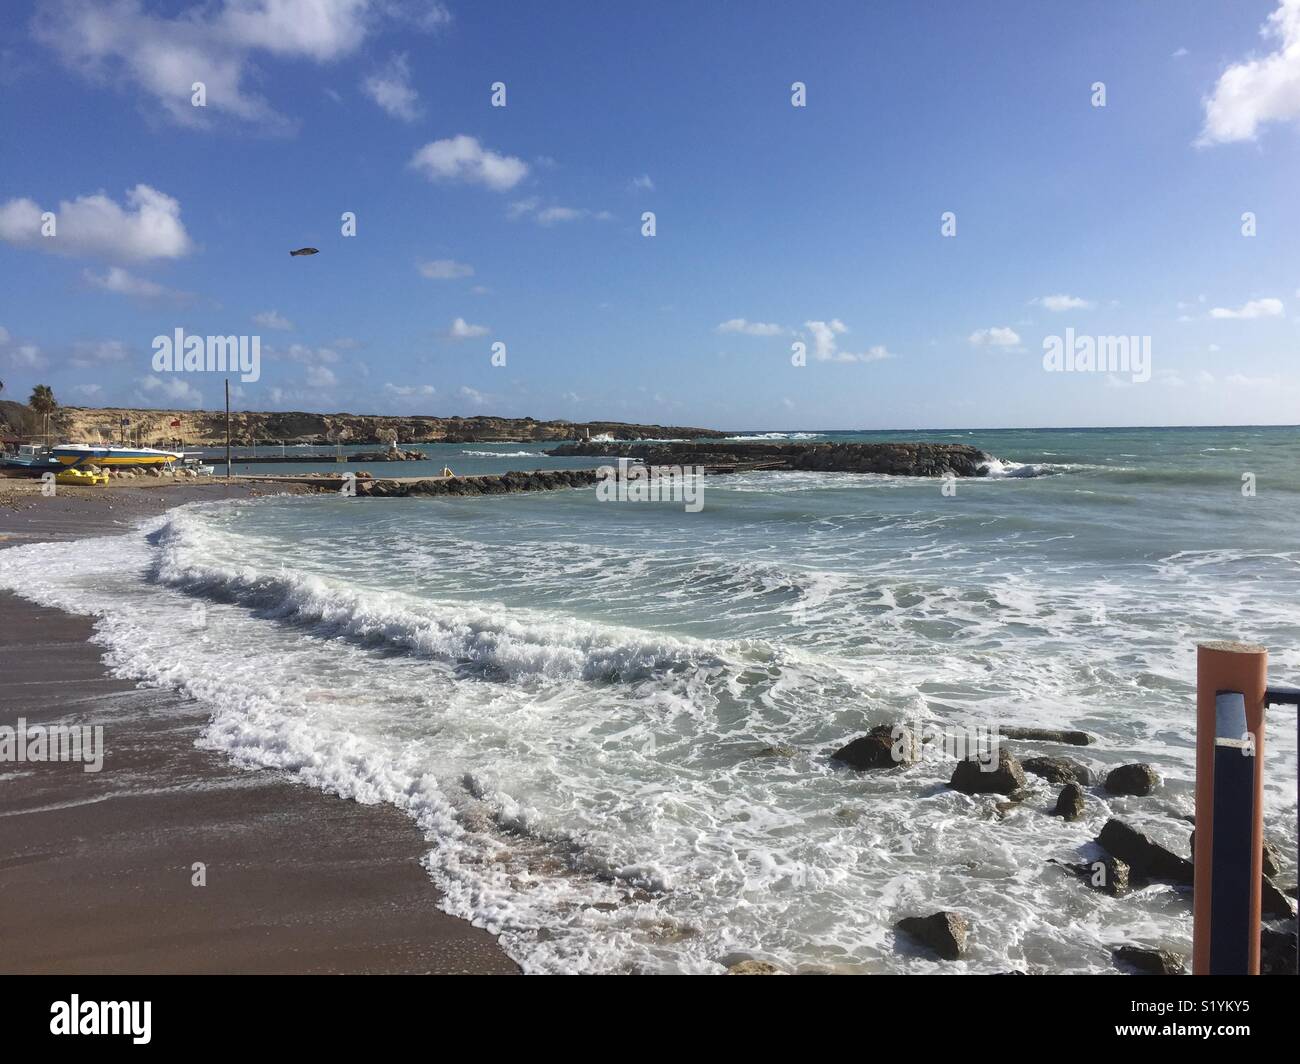 Rough seas prove too much for a fish at Coral Bay, Paphos, Cyprus Stock Photo